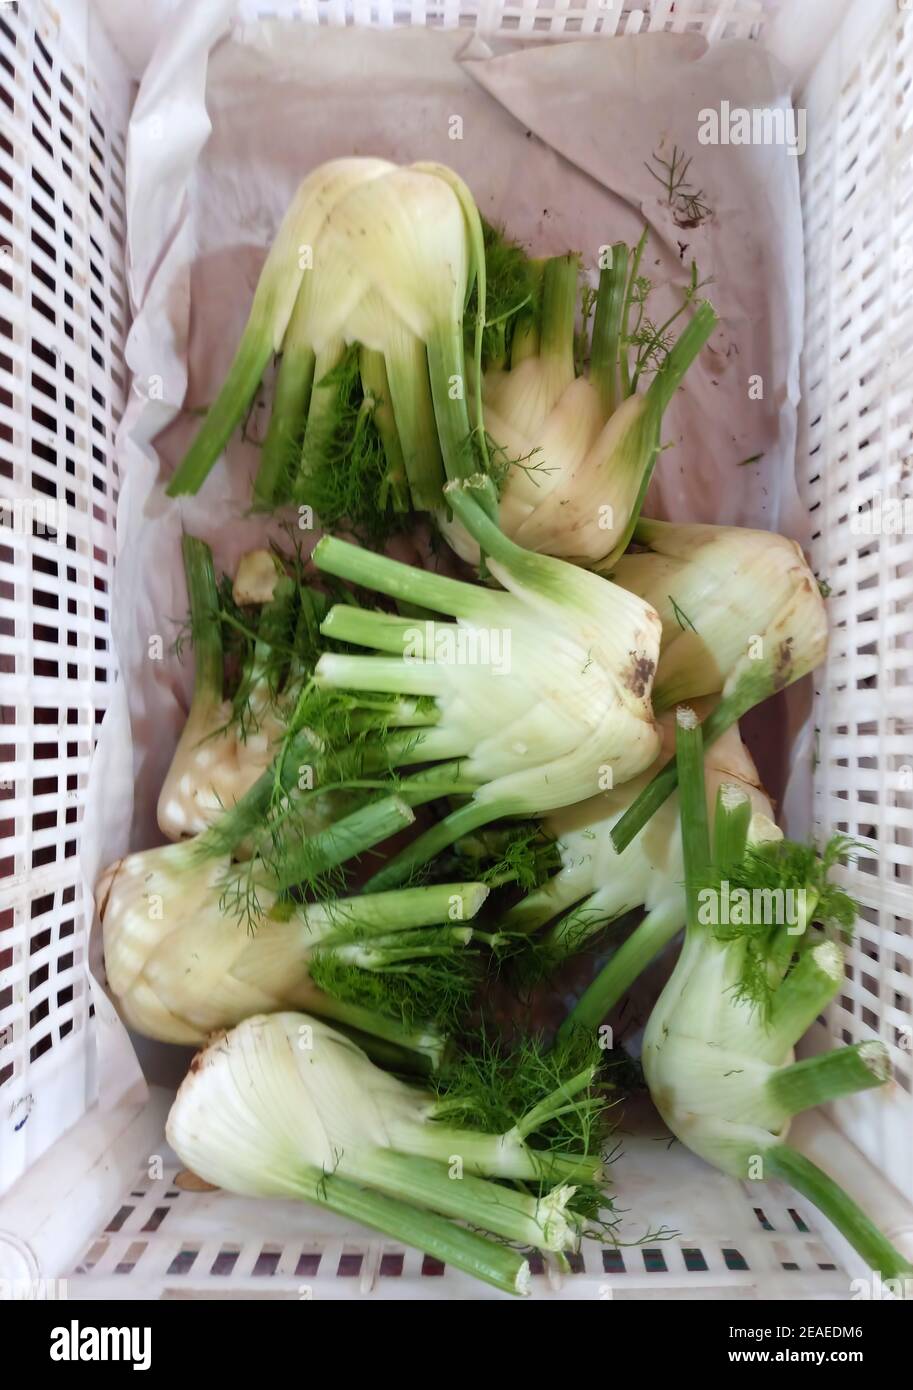 healthy organic aromatic fennel bulbs on sale at the farmer market. Used in salads, sauces, soups Stock Photo